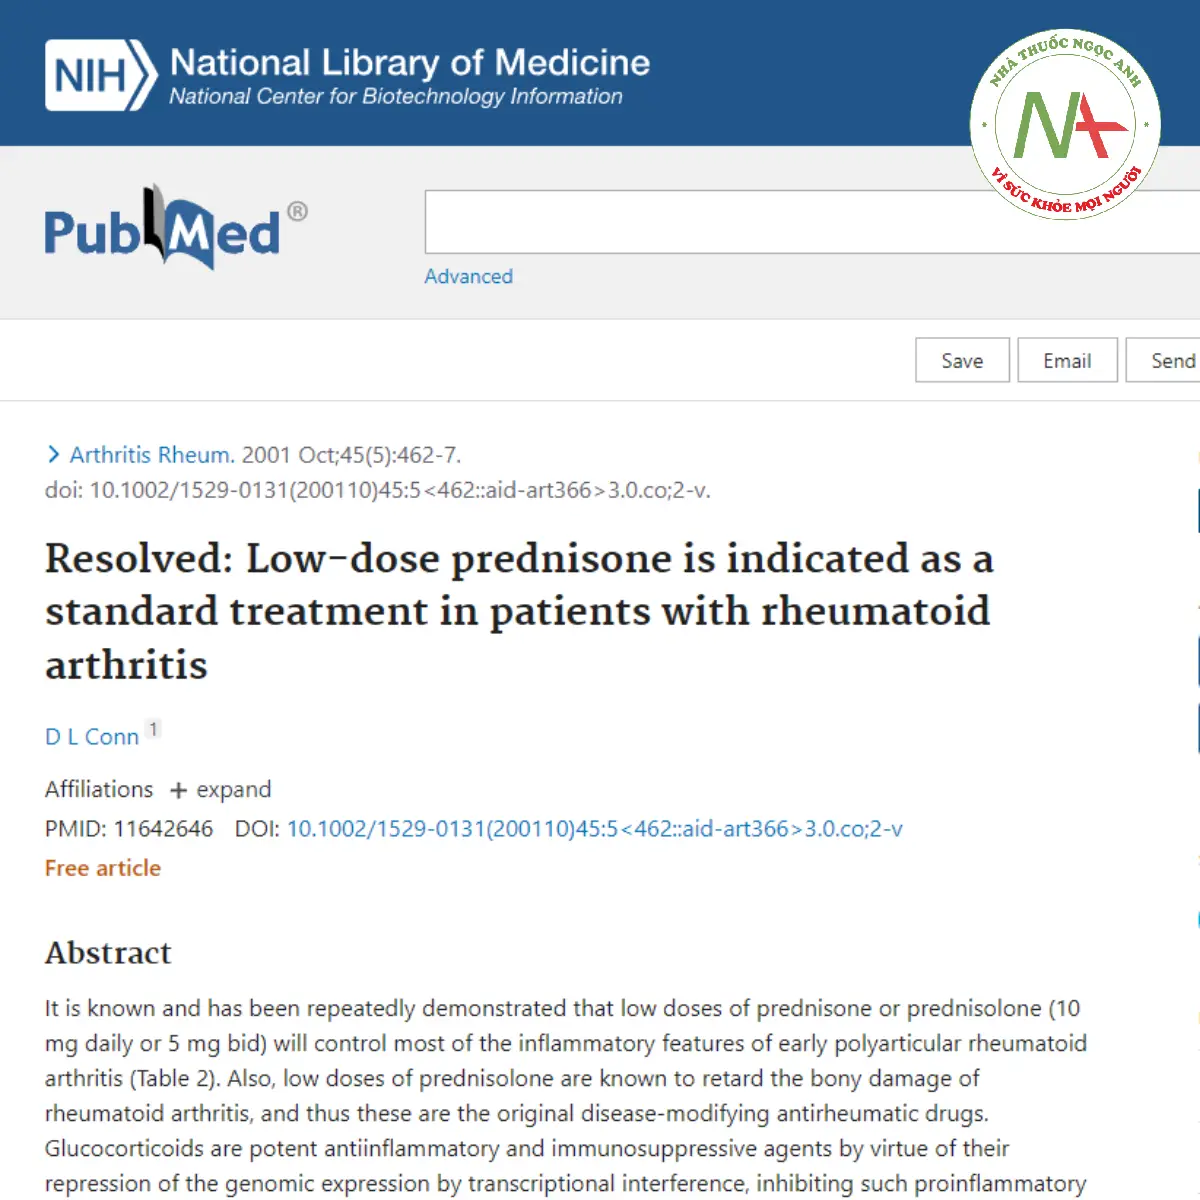 Resolved: Low-dose prednisone is indicated as a standard treatment in patients with rheumatoid arthritis